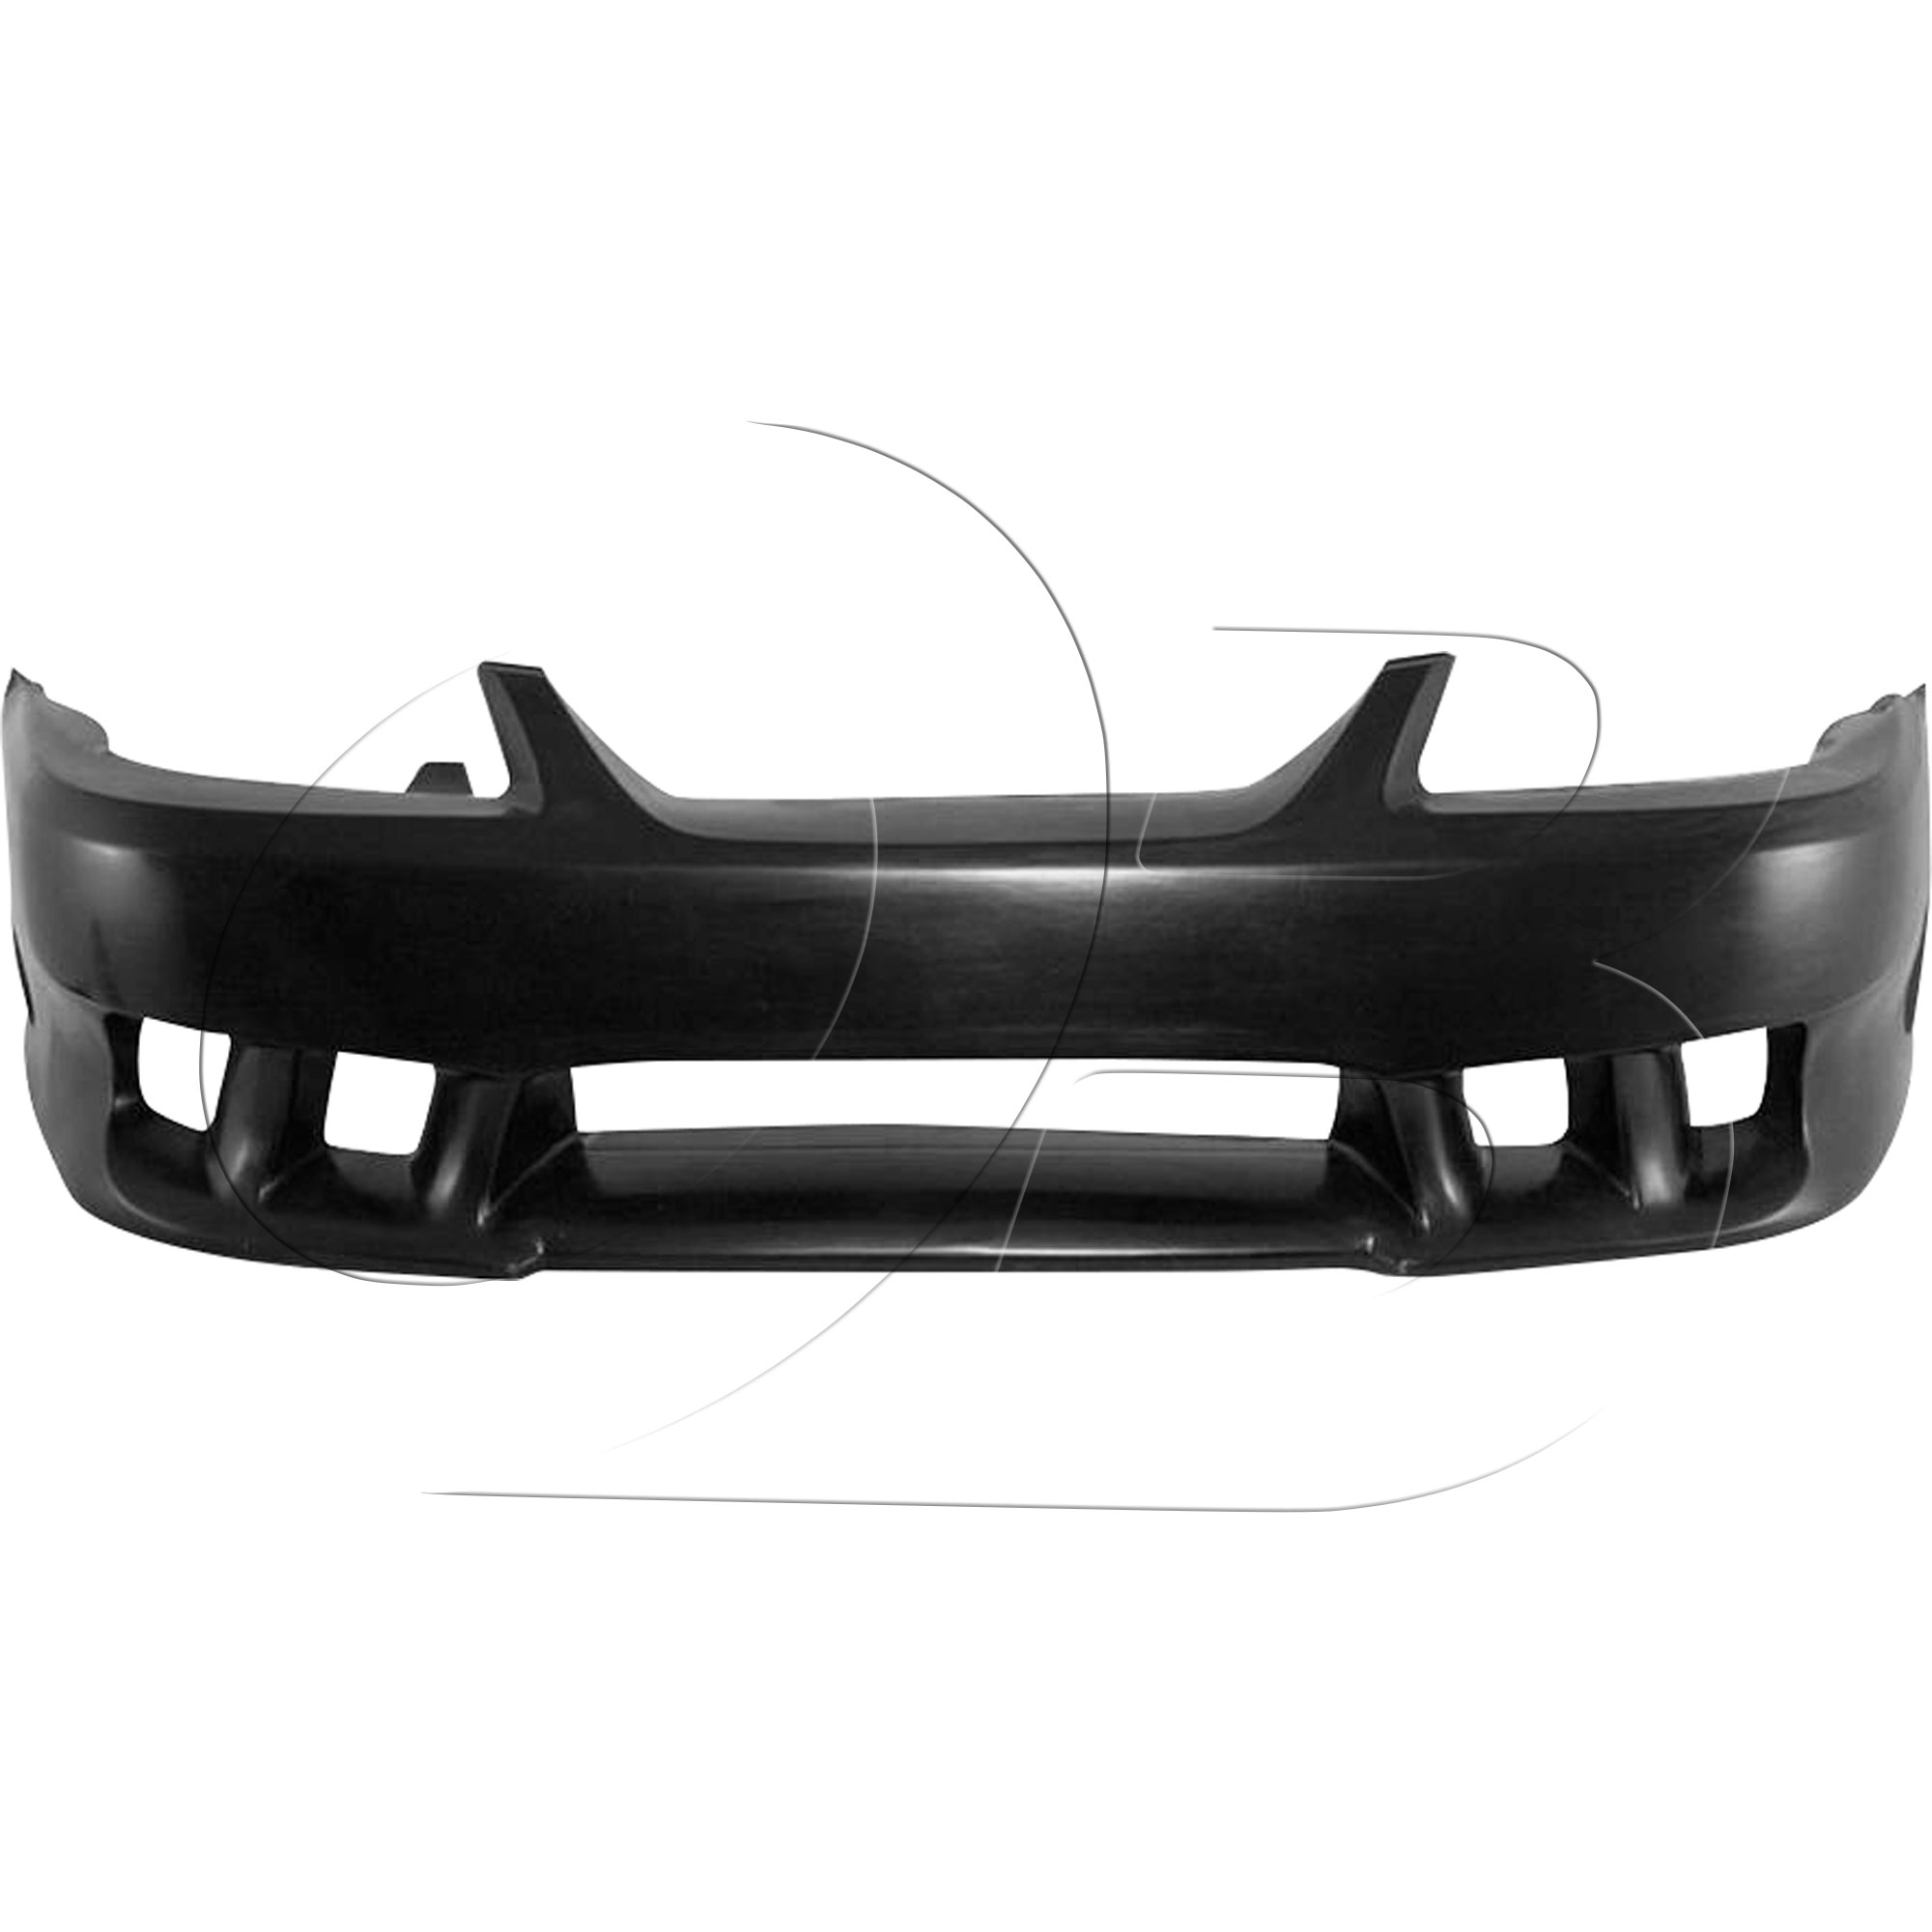 KBD Urethane SLN Style 1pc Front Bumper > Ford Mustang 1999-2004 - Image 2